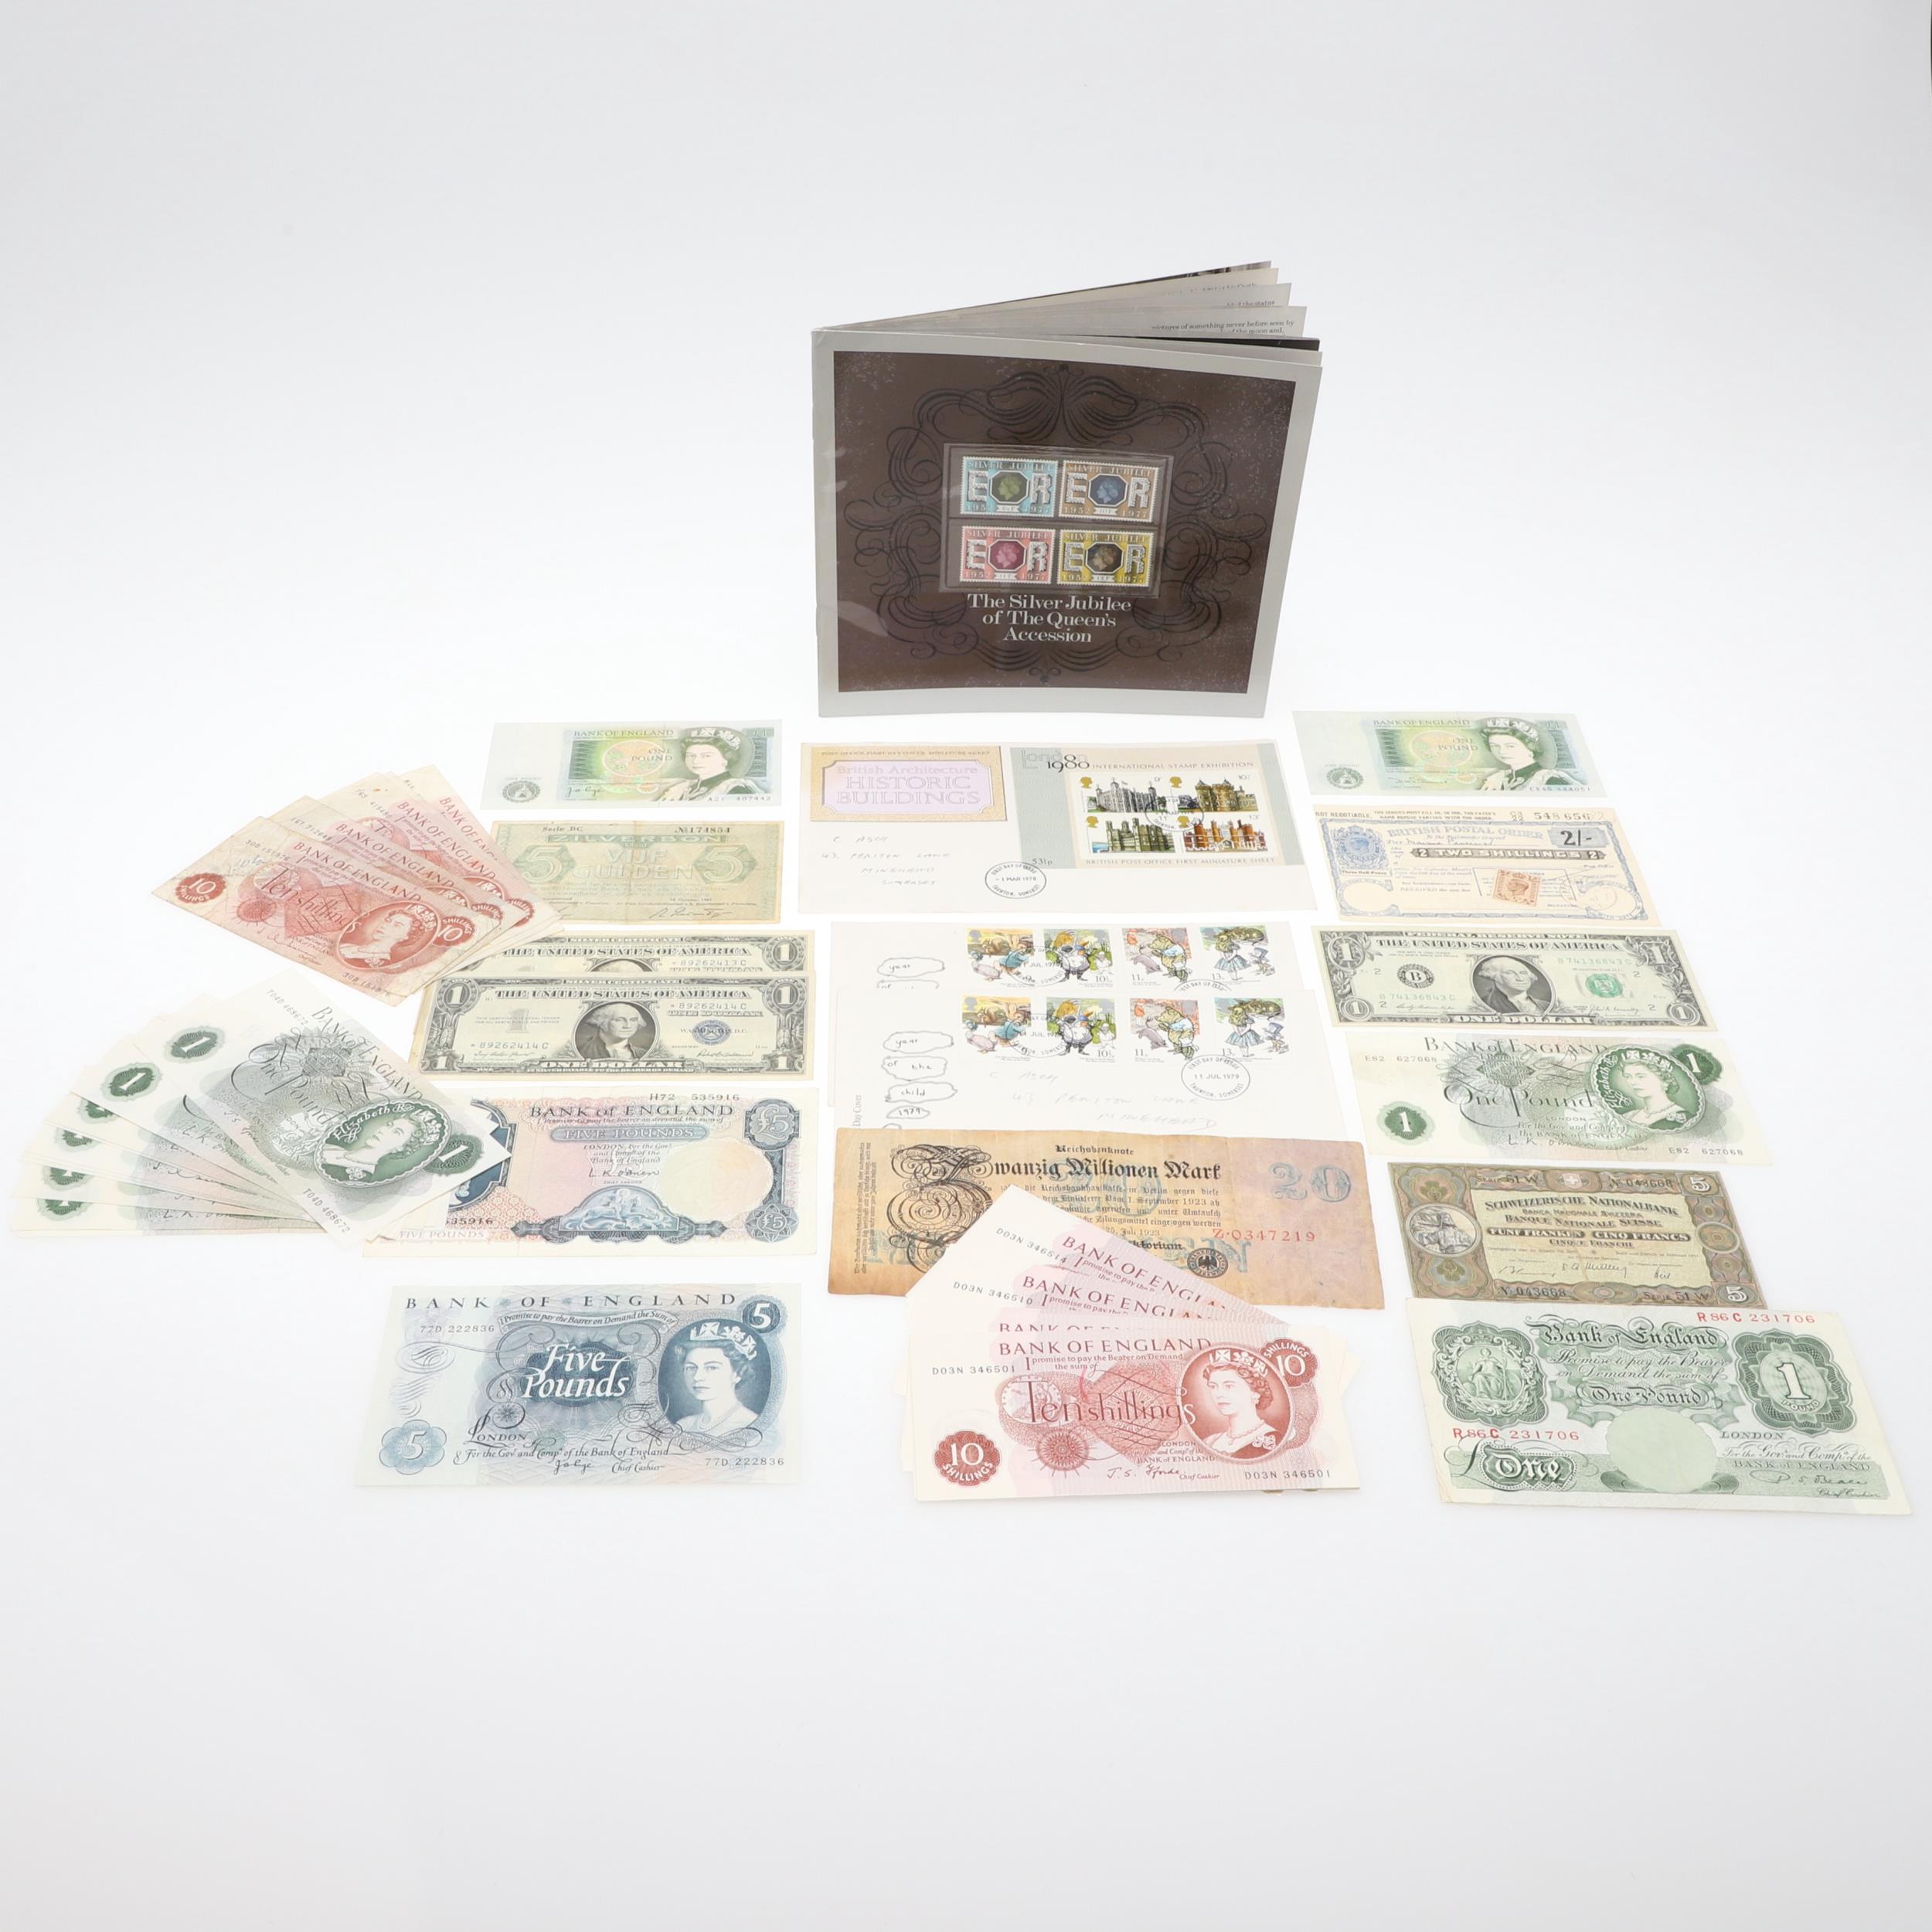 A SMALL COLLECTION OF BANKNOTES TO INCLUDE SEVENTEEN CONSECUTIVE TEN SHILLING NOTES. - Image 17 of 17